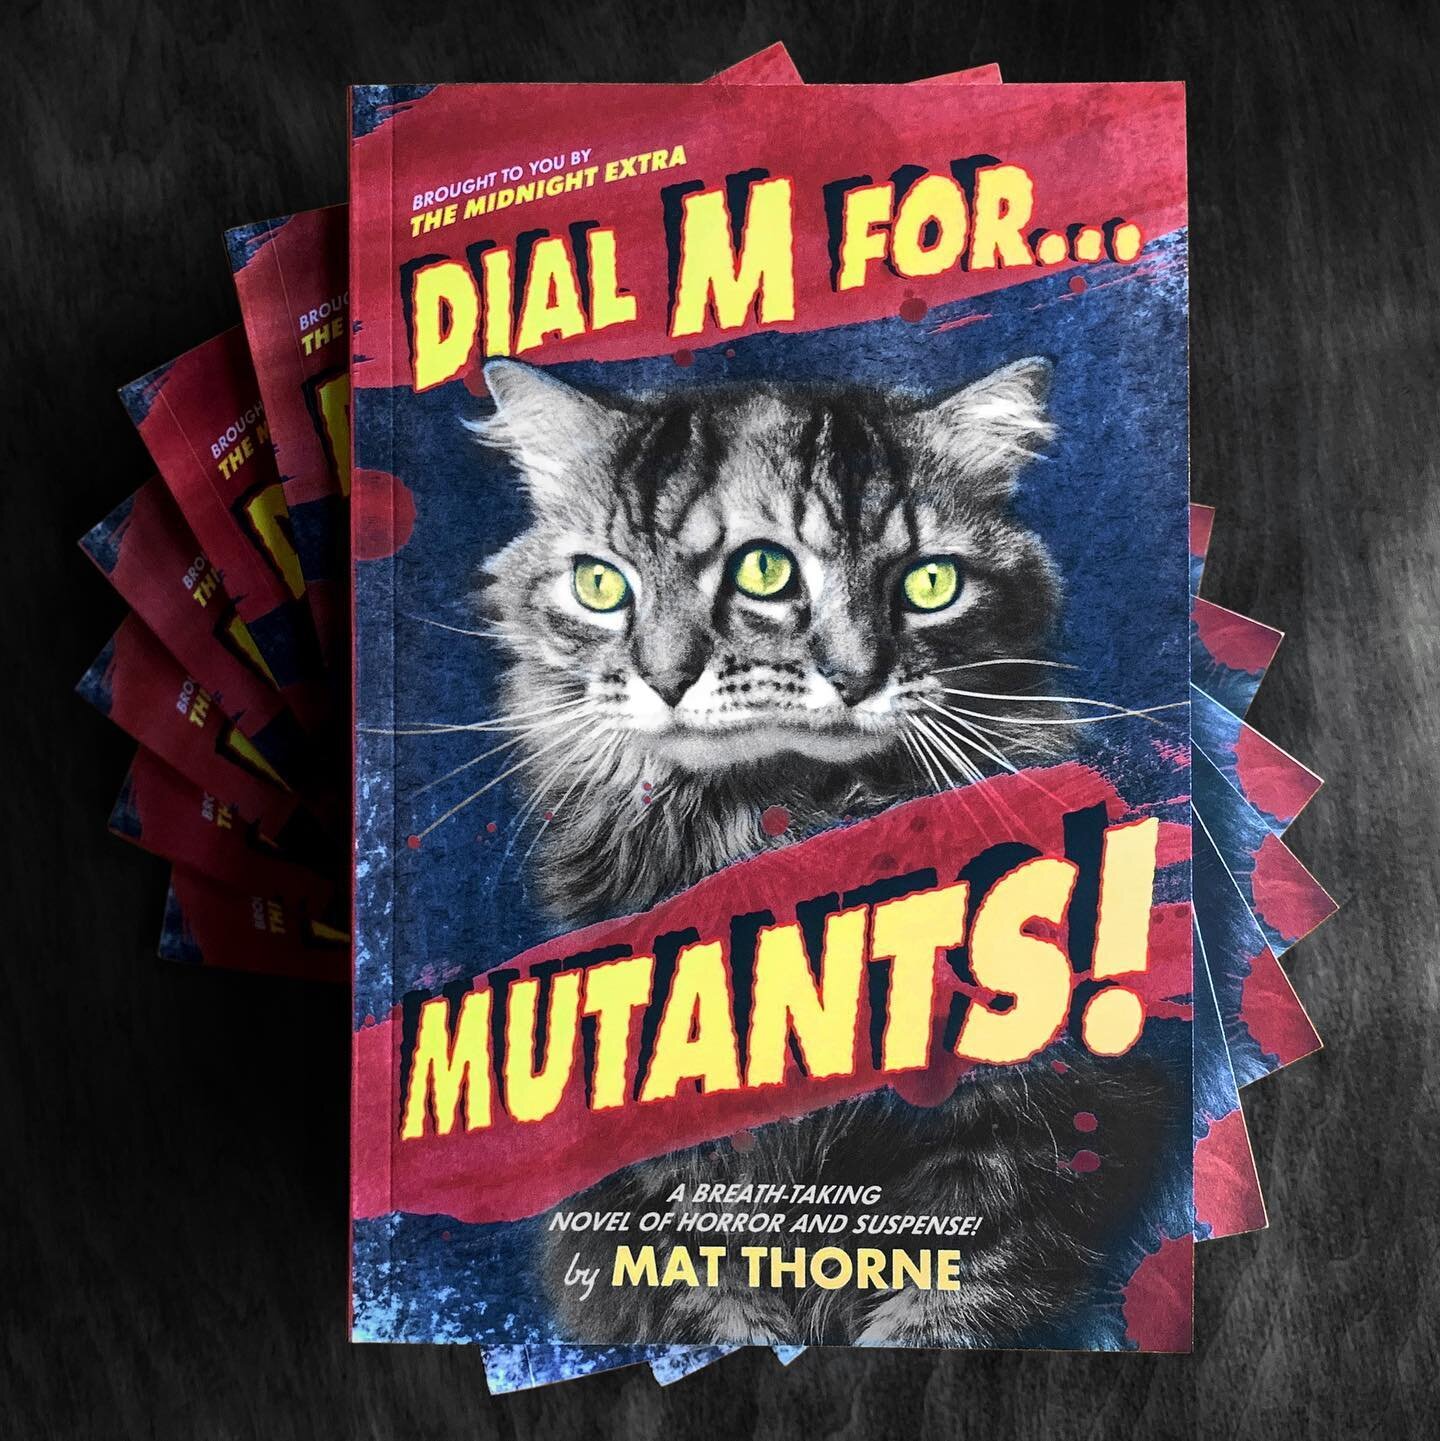 LOOK OUT!!! It&rsquo;s our VERY FIRST BOOK!! Follow two of our INTREPID REPORTERS as they chase down a HORRIFYING MUTANT!! Link in bio... get your copy TODAY!
-
Brought to you by The Midnight Extra and @matttthorne 
-
-
-
#horrorcommunity #horrorfan 